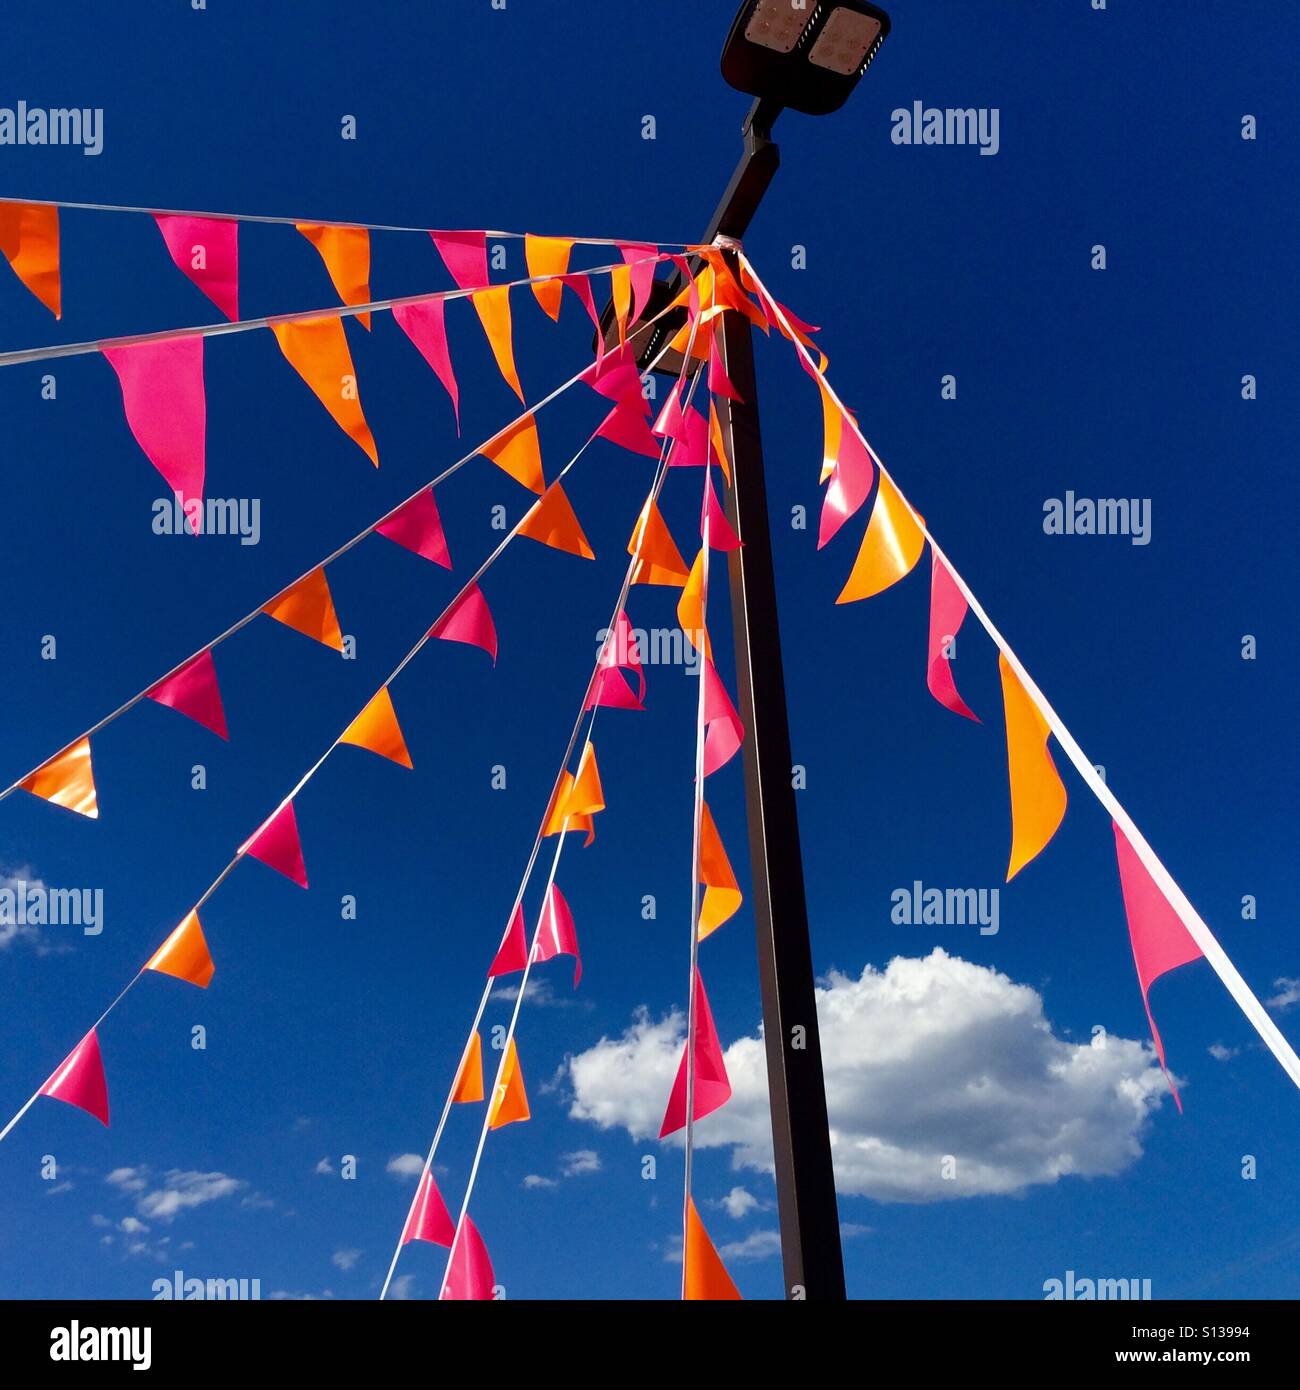 Flags upon a light pole stand in front of a blue sky containing a few clouds. Stock Photo